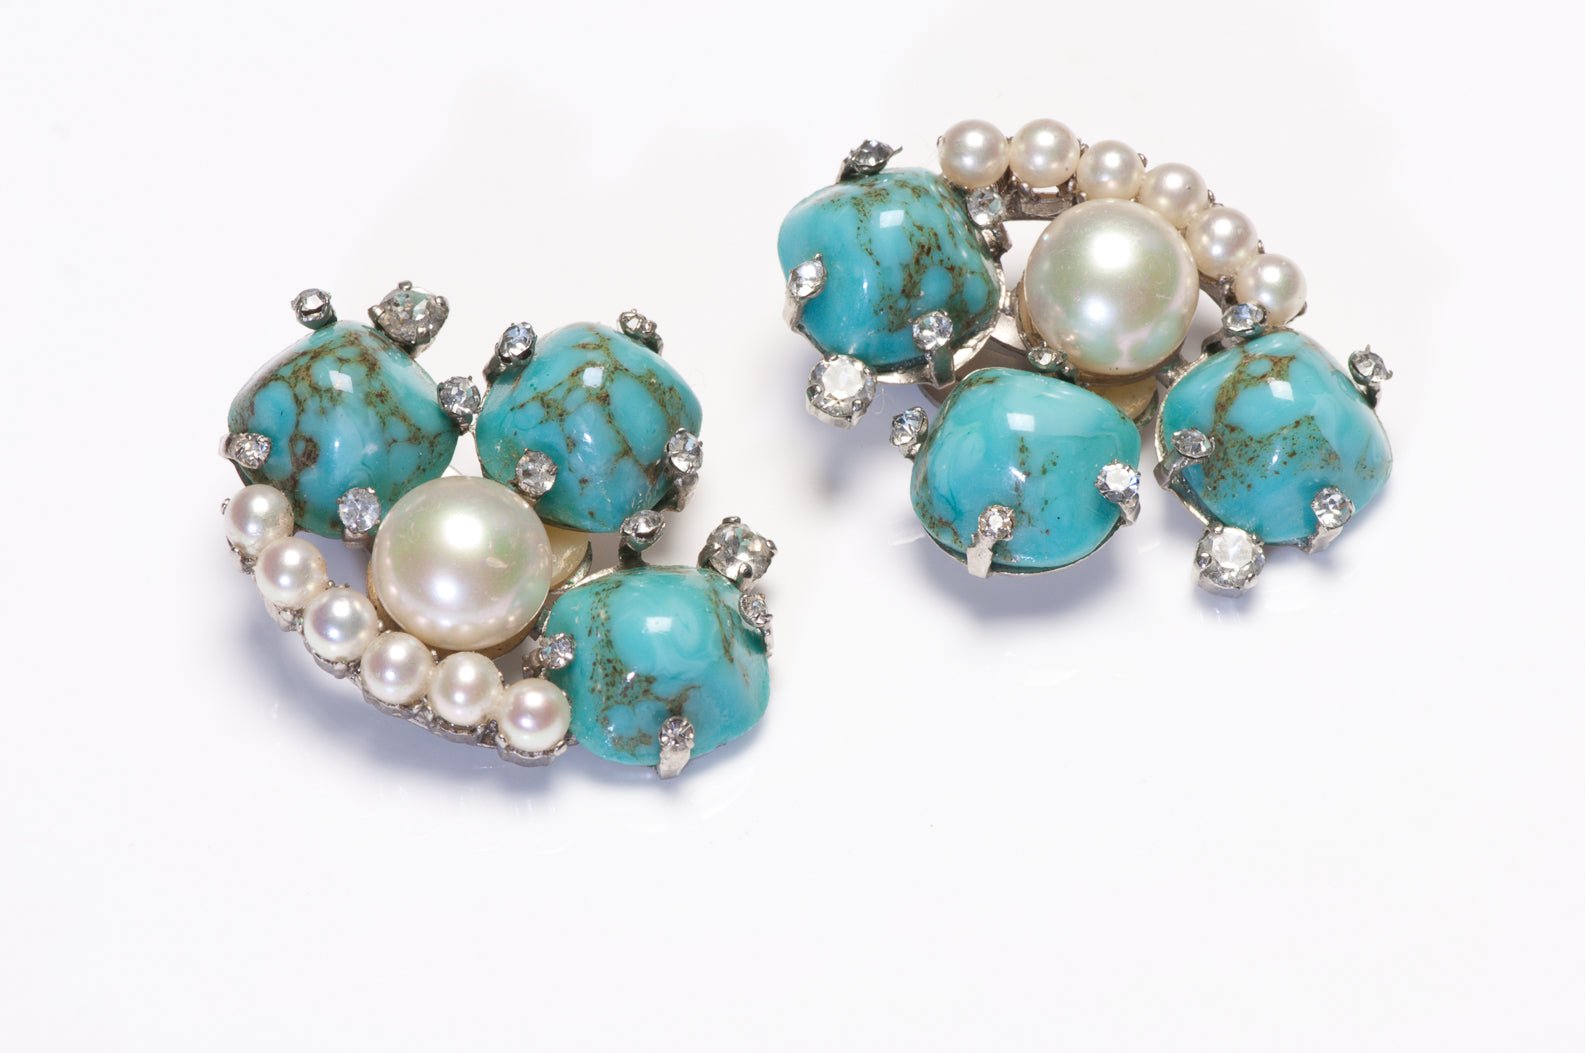 Vintage 1980's French Turquoise Cabochon Glass Pearl Crystal Earrings